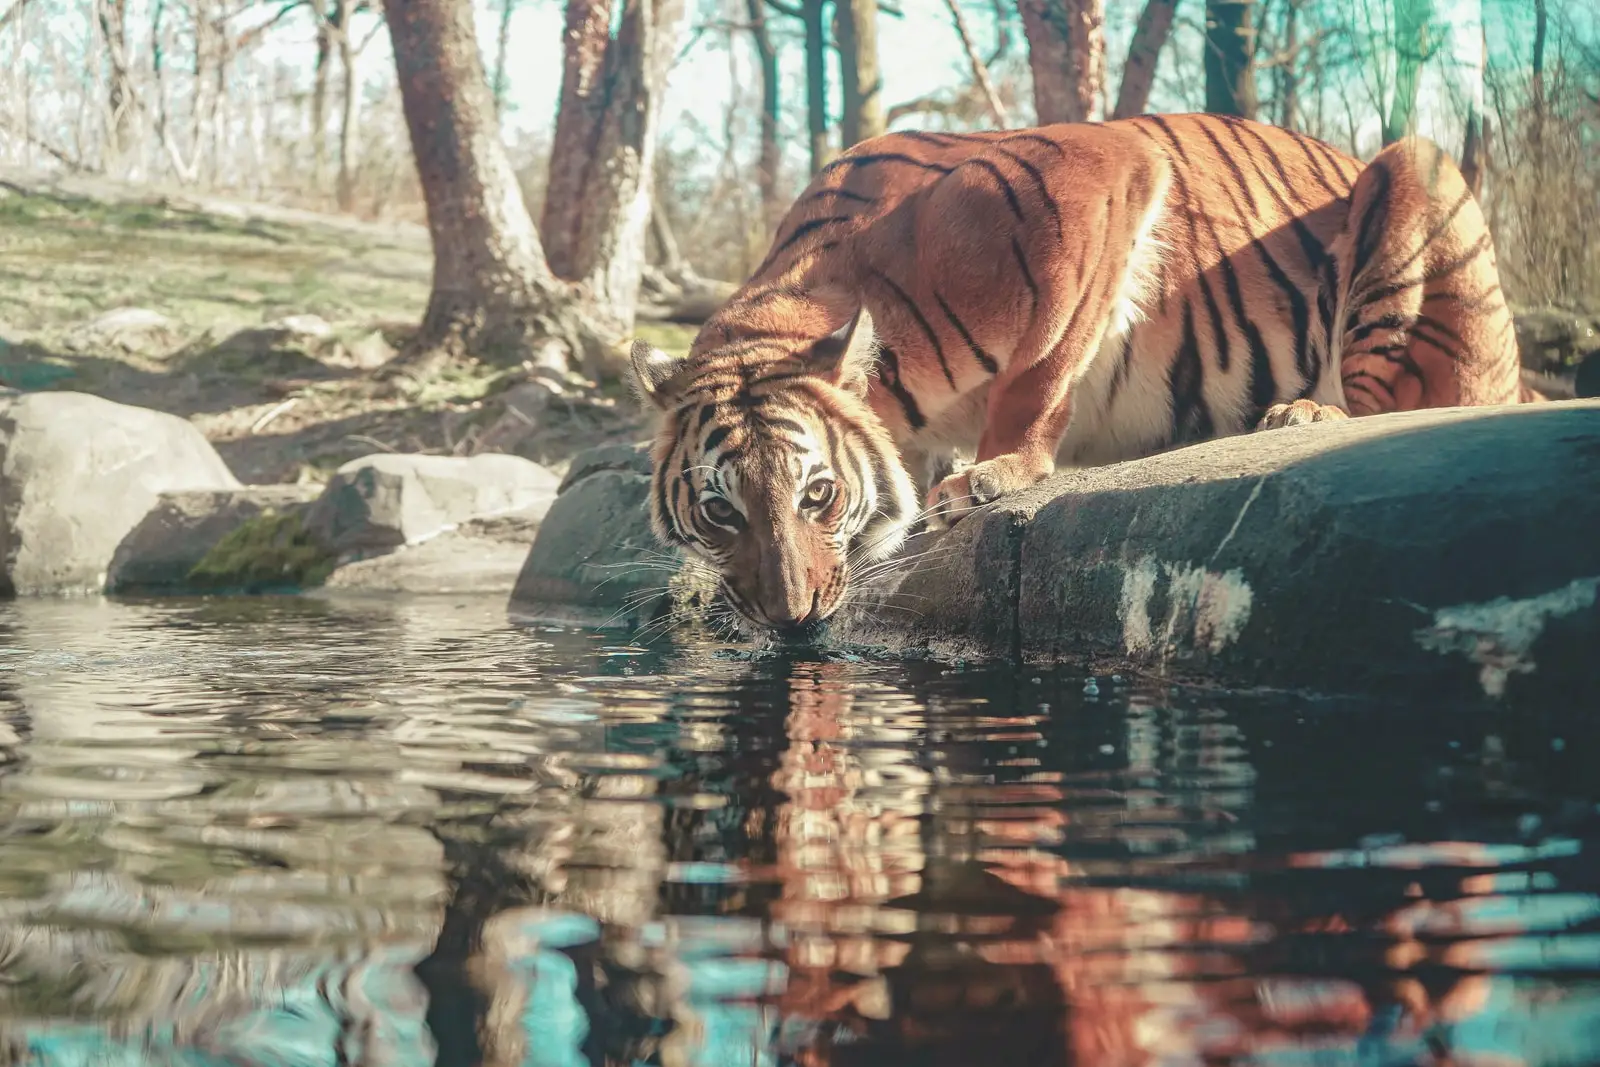 student watching tiger on water during daytime